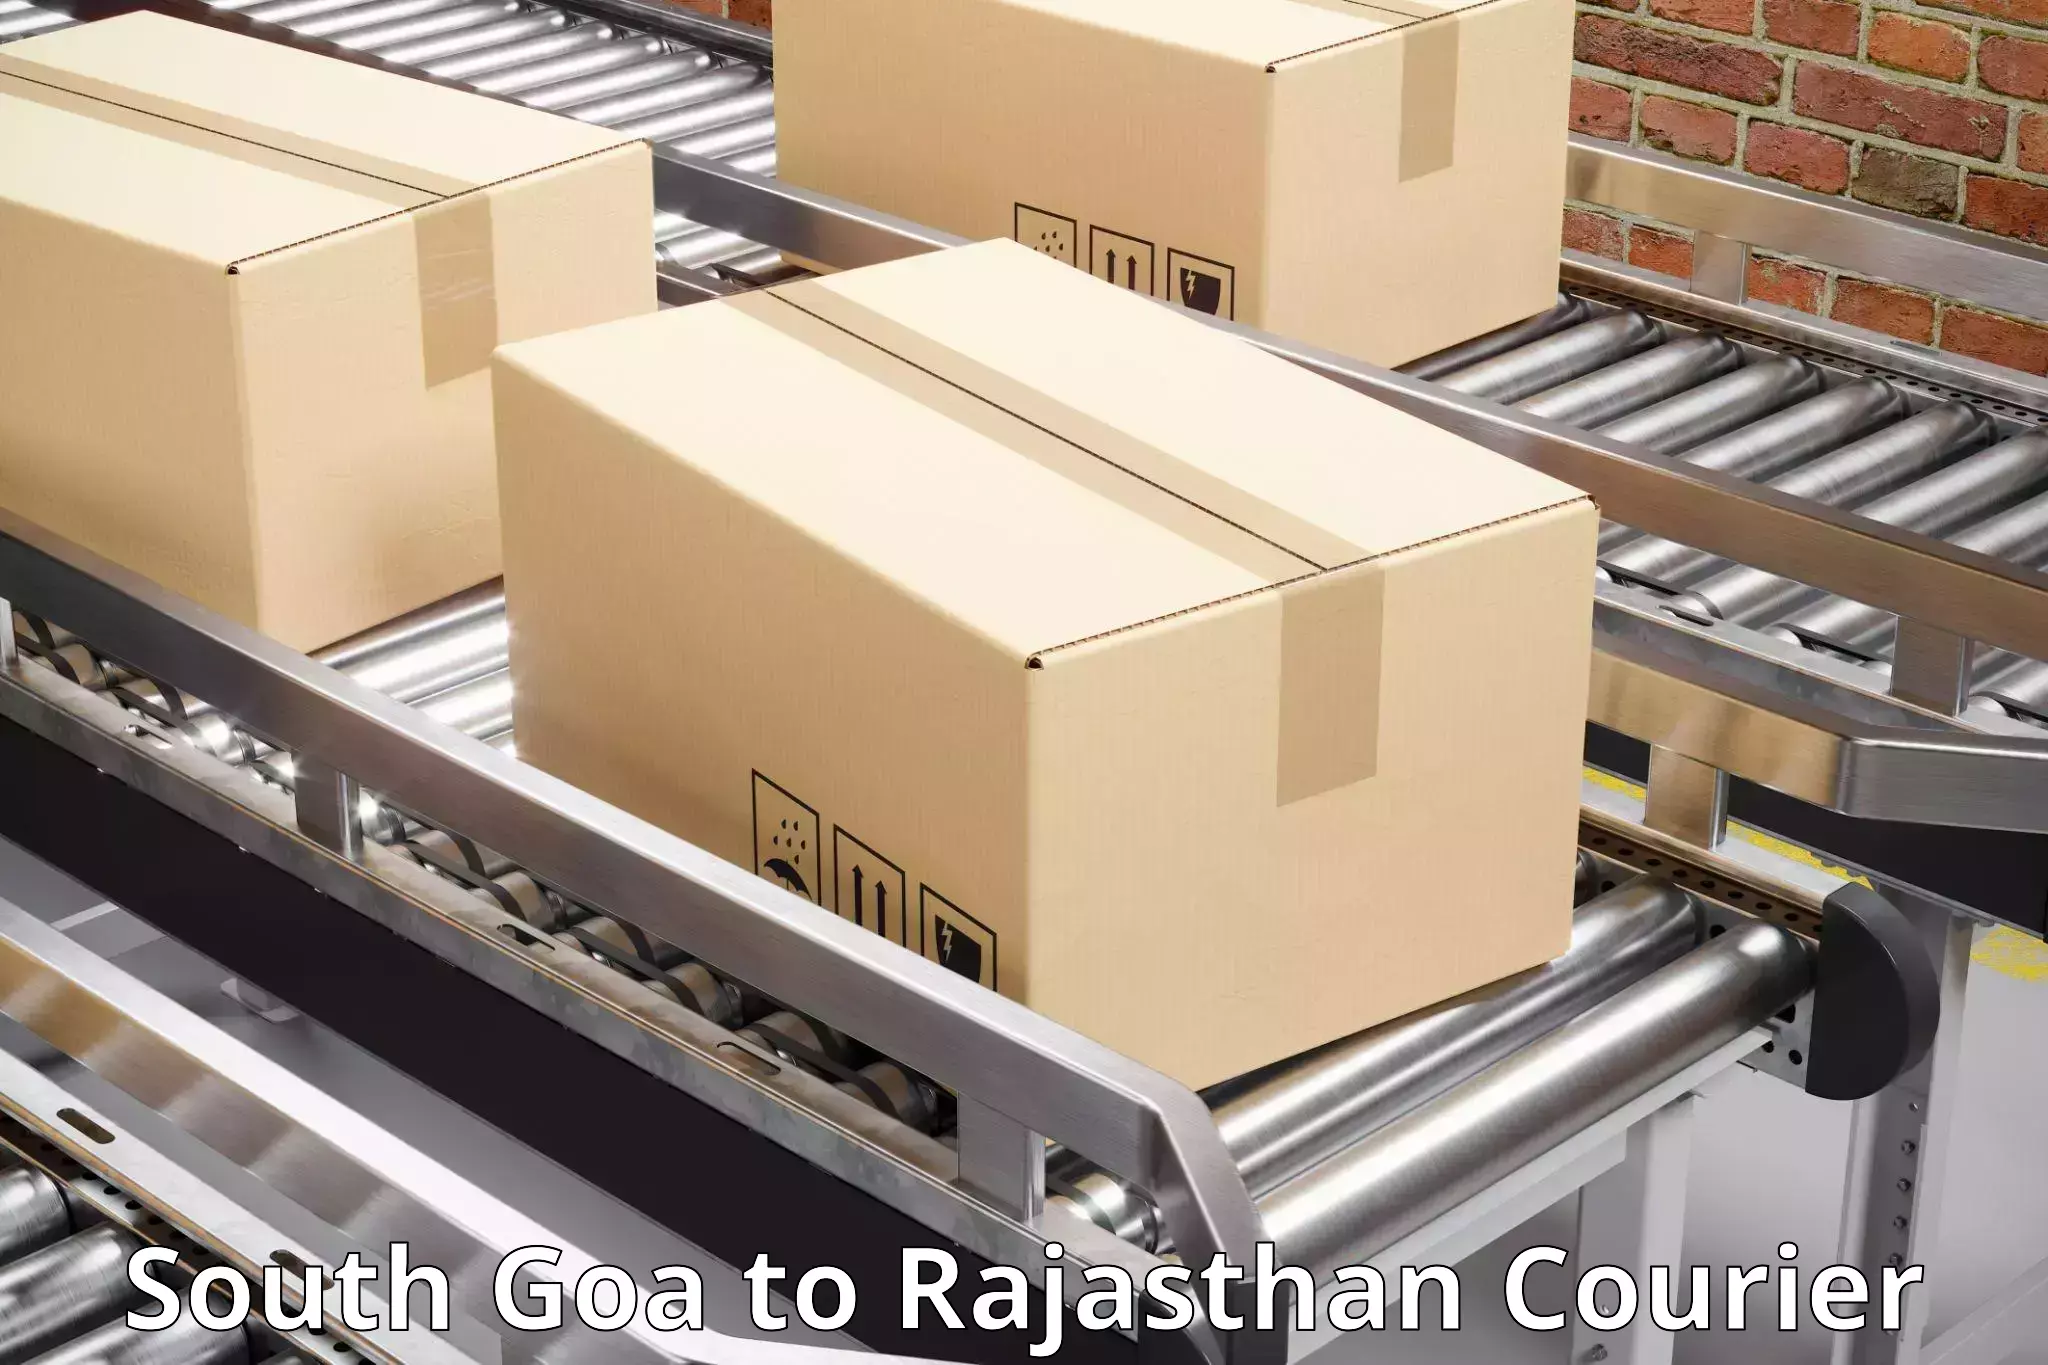 Multi-national courier services South Goa to Rajasthan